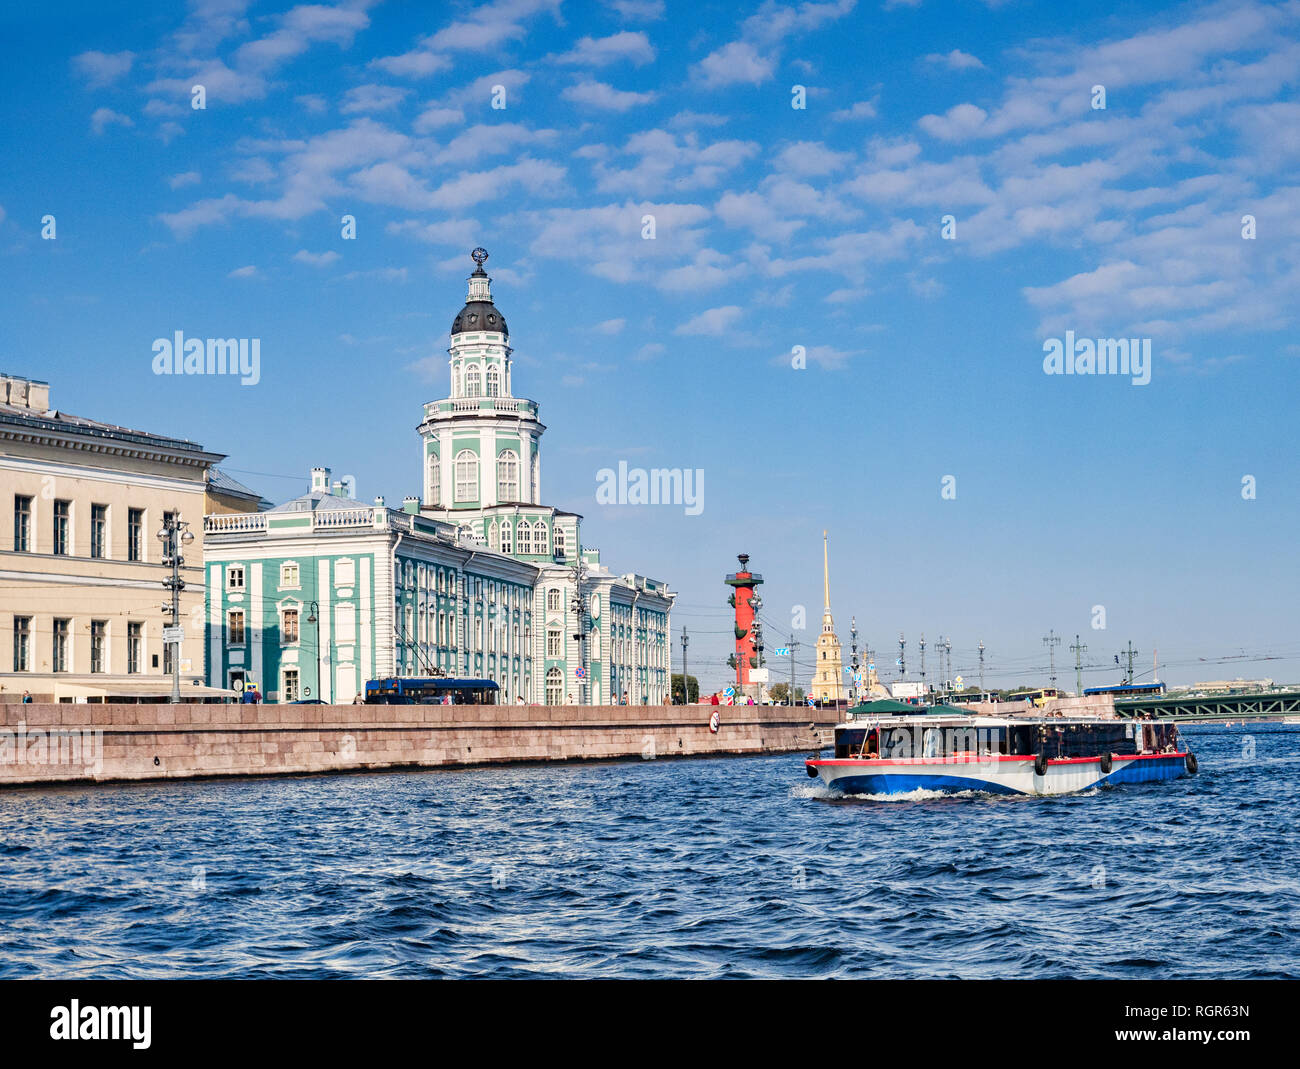 19 September 2018: St Petersburg, Russia - The Kunstkamera, or Kunstkammer Building which hosts the Peter the Great Museum of Anthropology and... Stock Photo